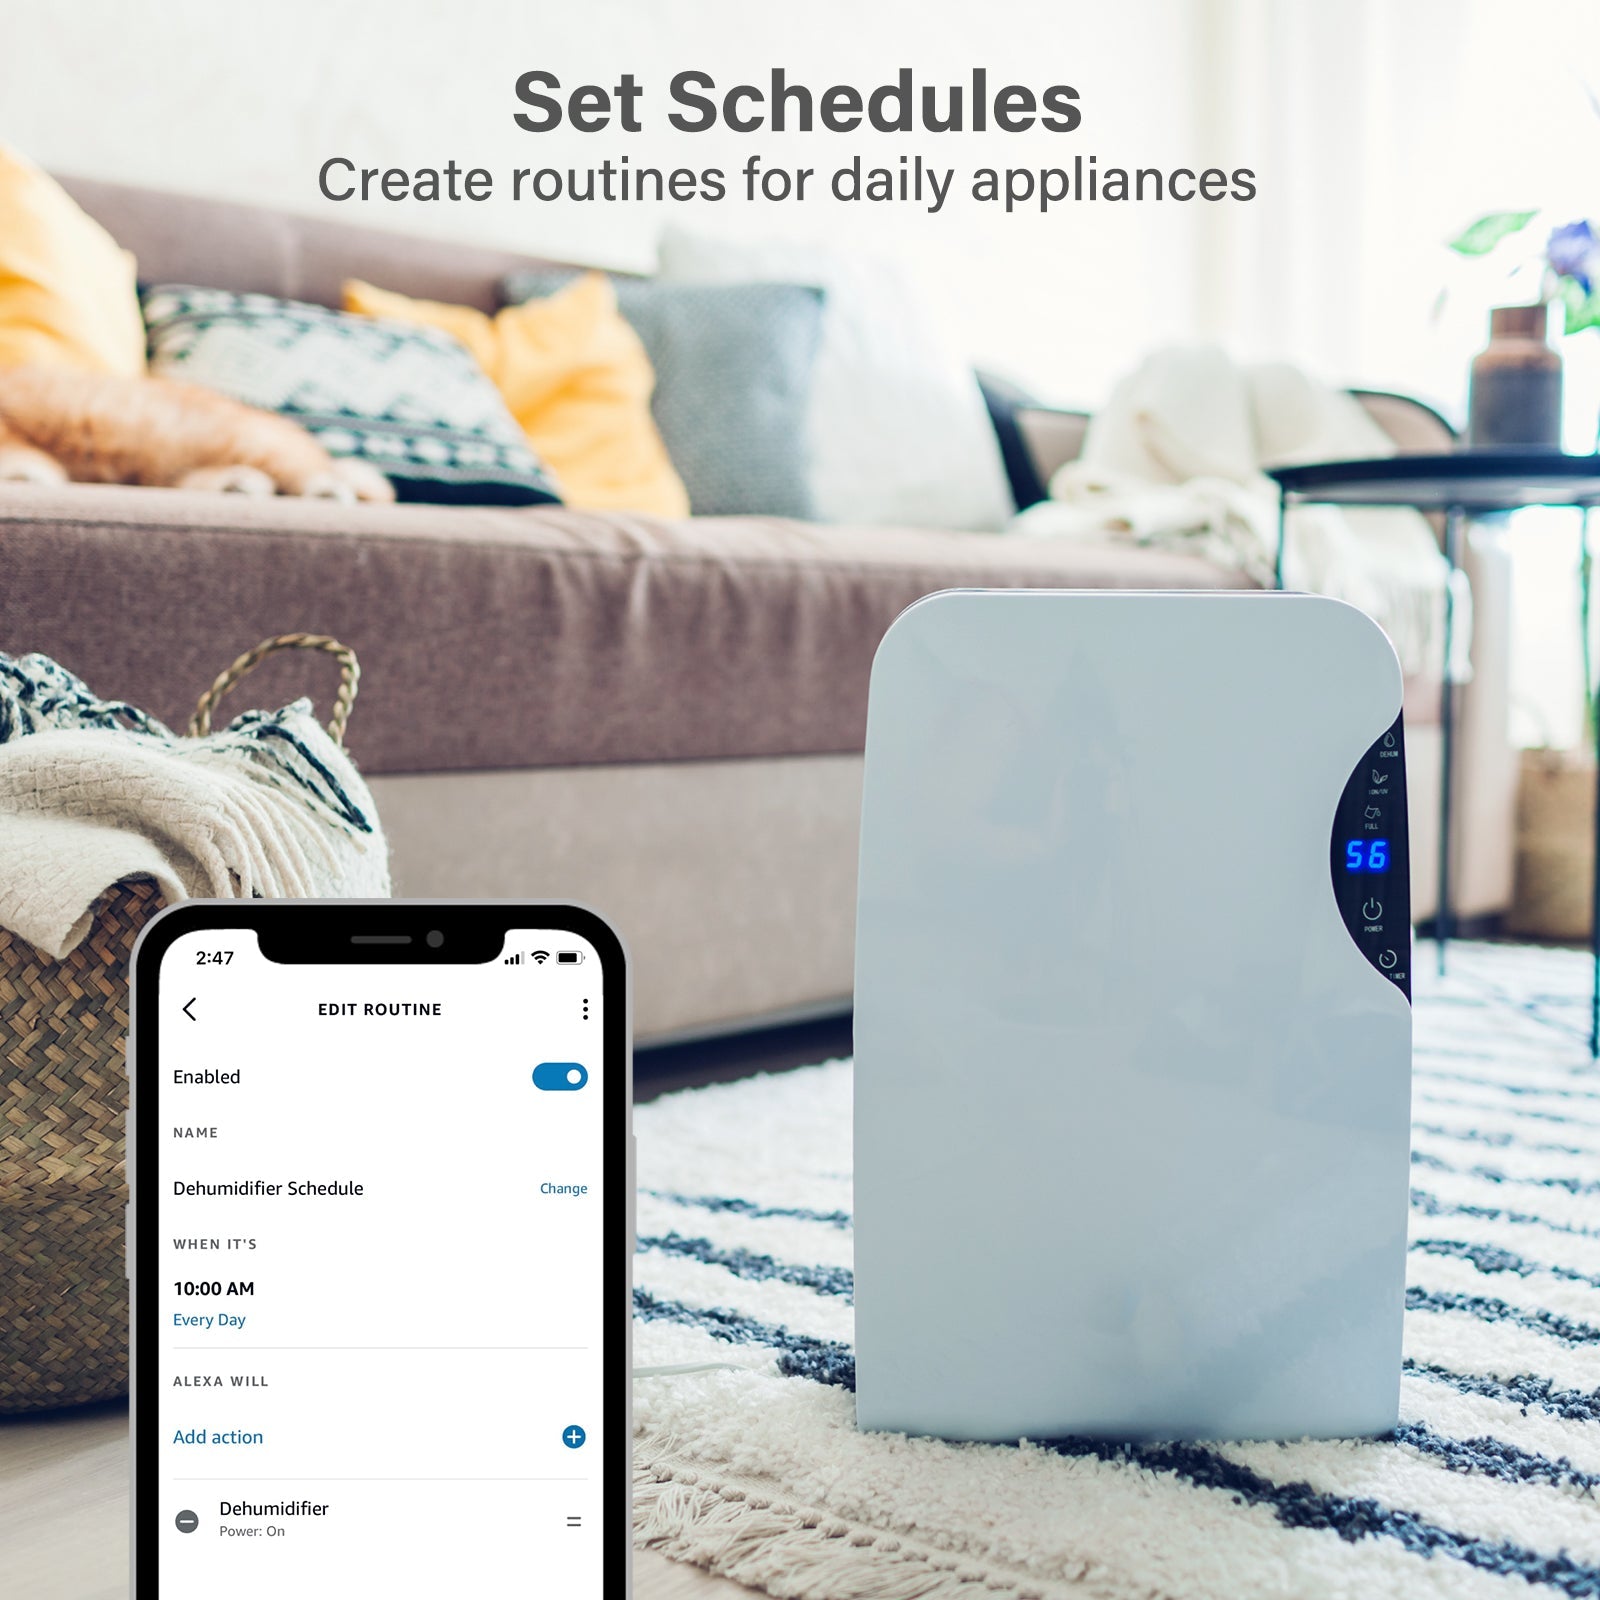 Scheduling & Automation: Create personalized schedules and automation routines for the Sengled Smart Plug. Set specific times for devices to turn on or off automatically, adding convenience to your daily routine.